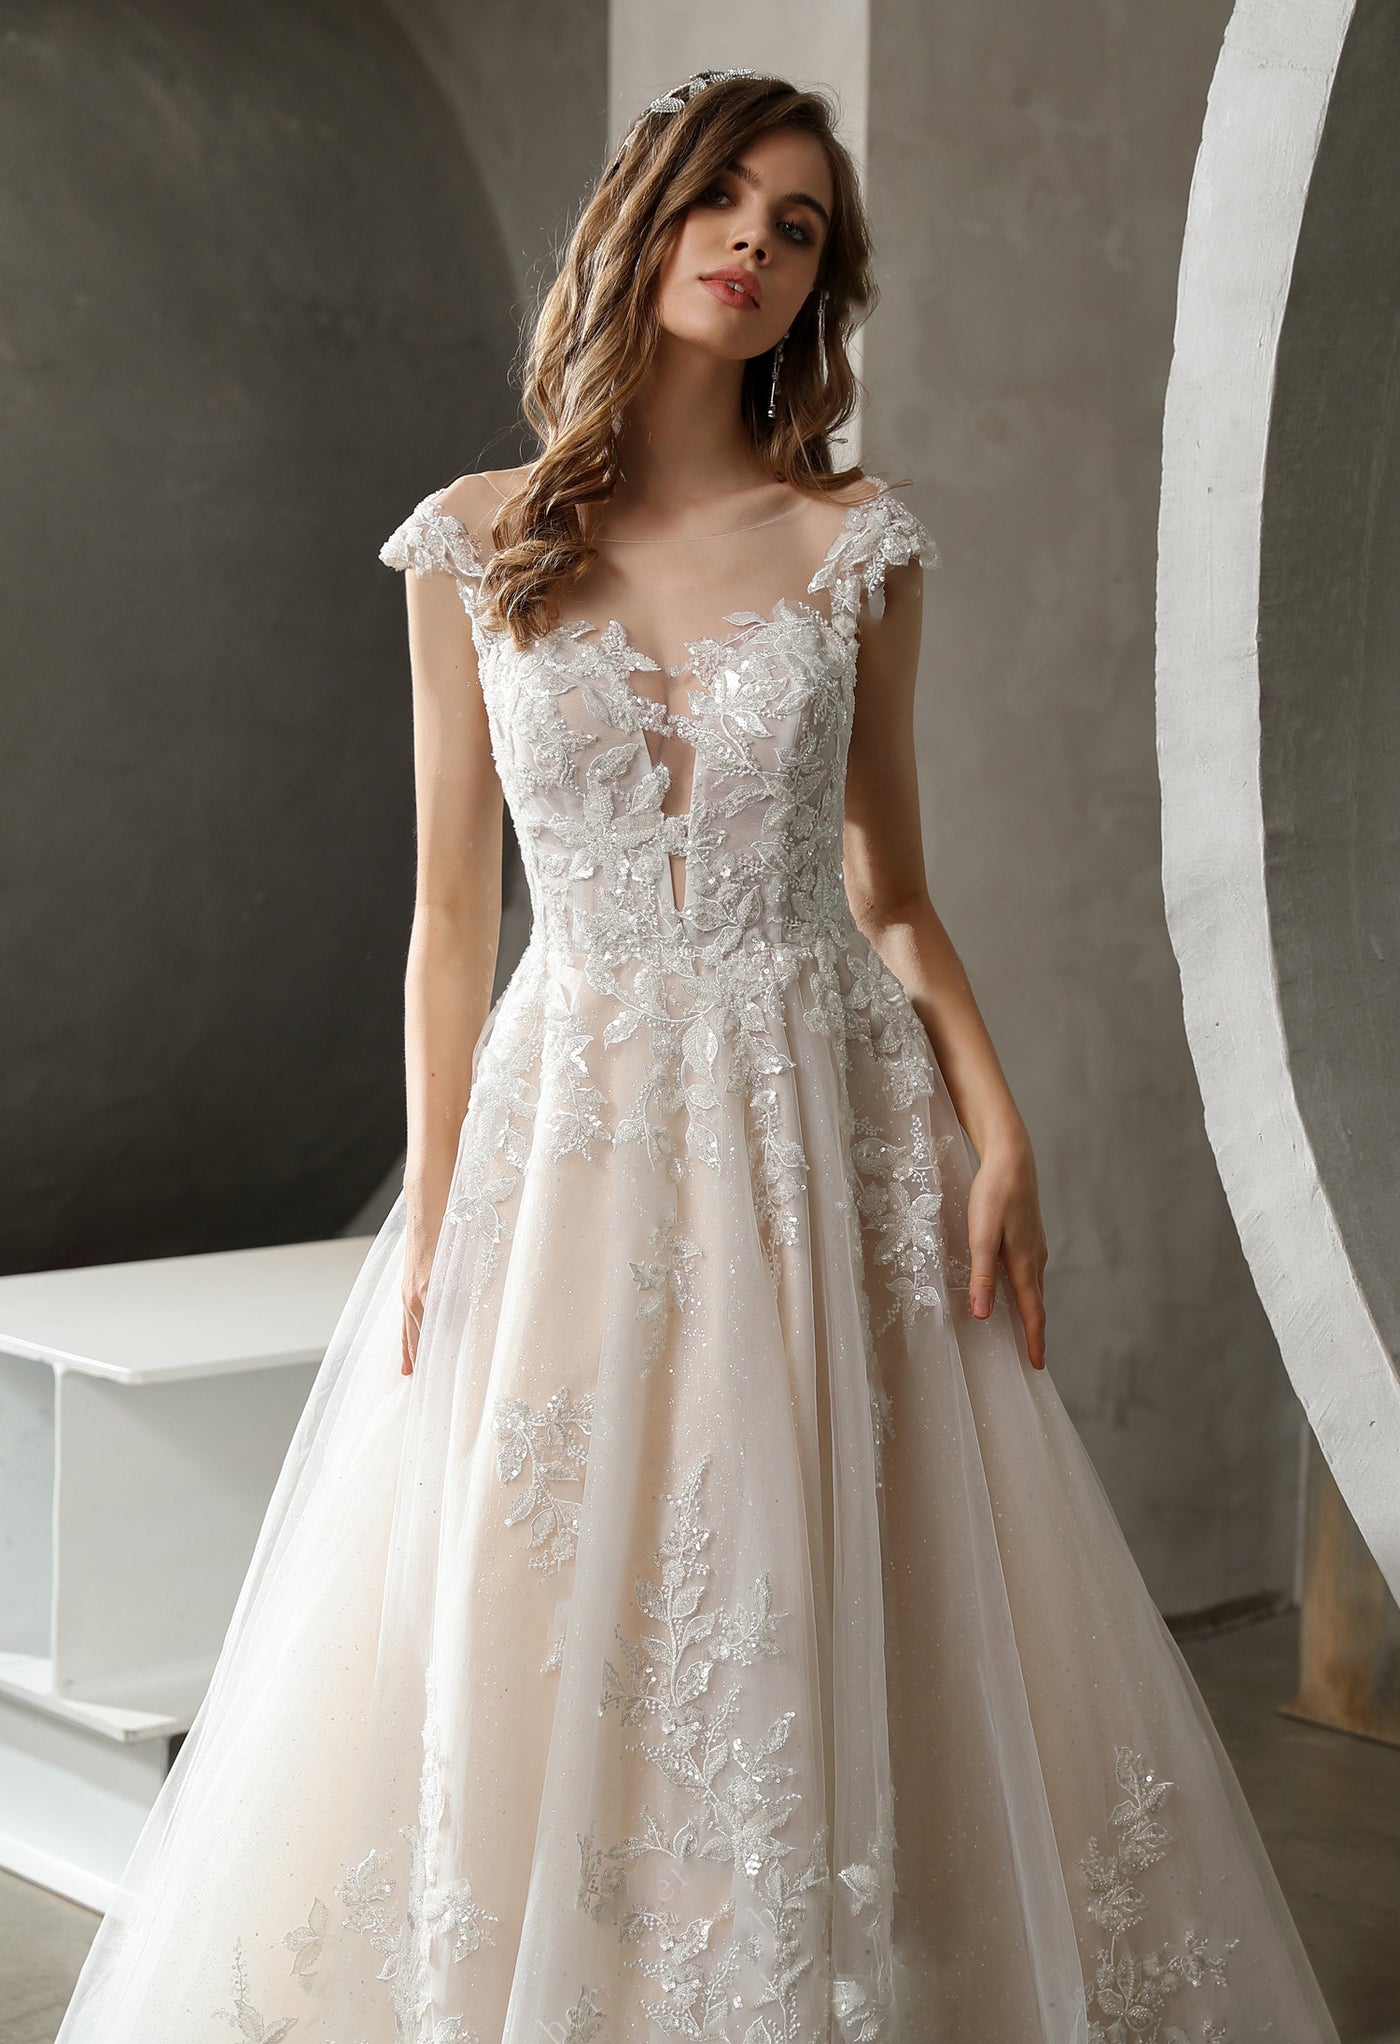 Plunging Illusion Neckline with Beaded Lace A-line Wedding Dress